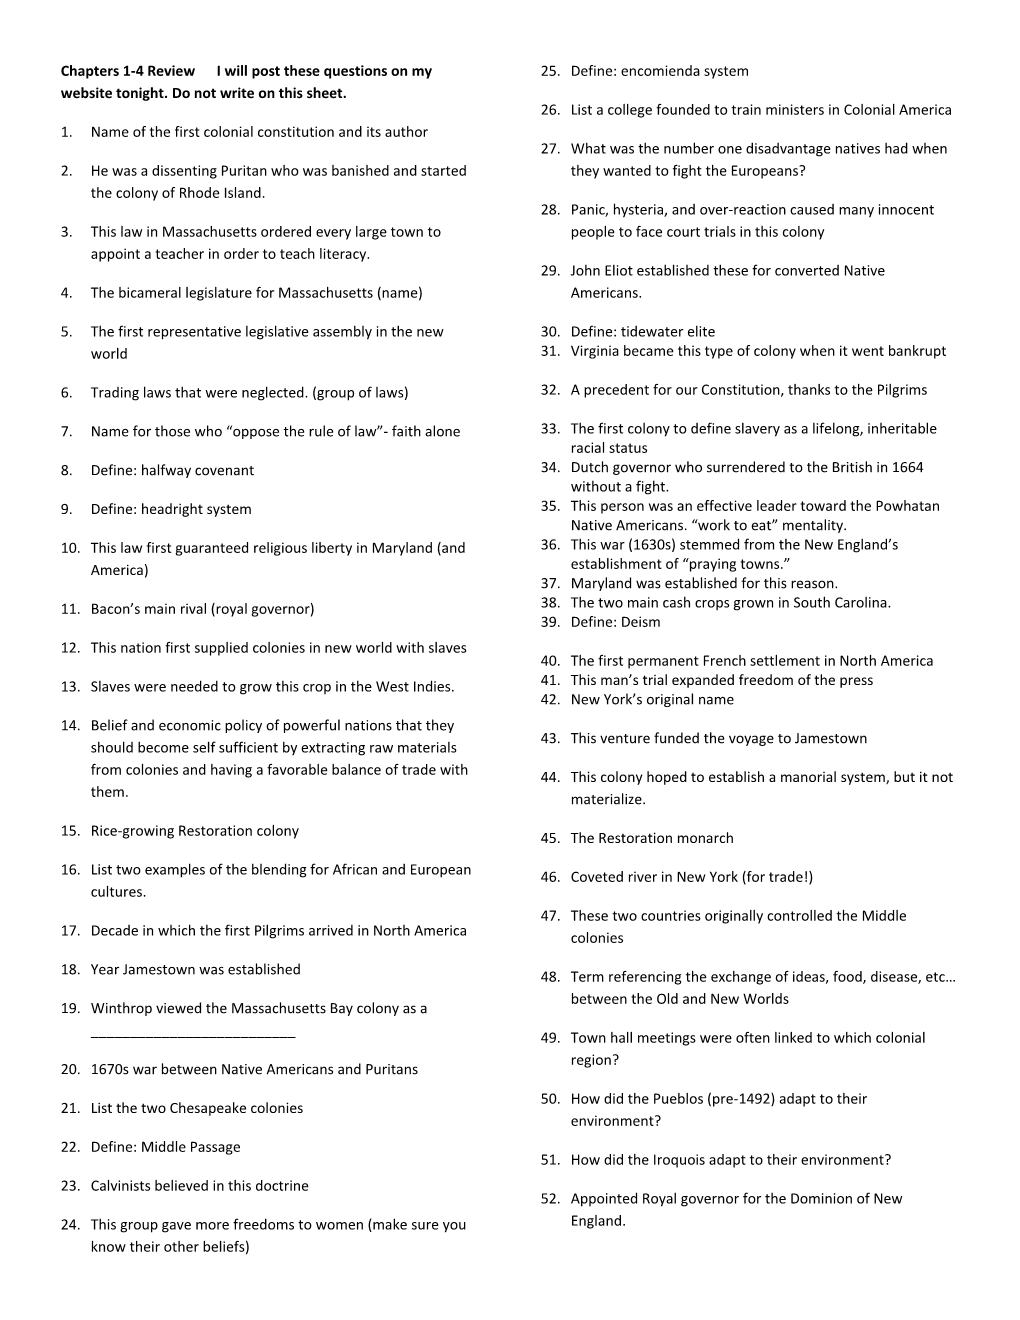 Chapters 1-4 Review I Will Post These Questions on My Website Tonight. Do Not Write On